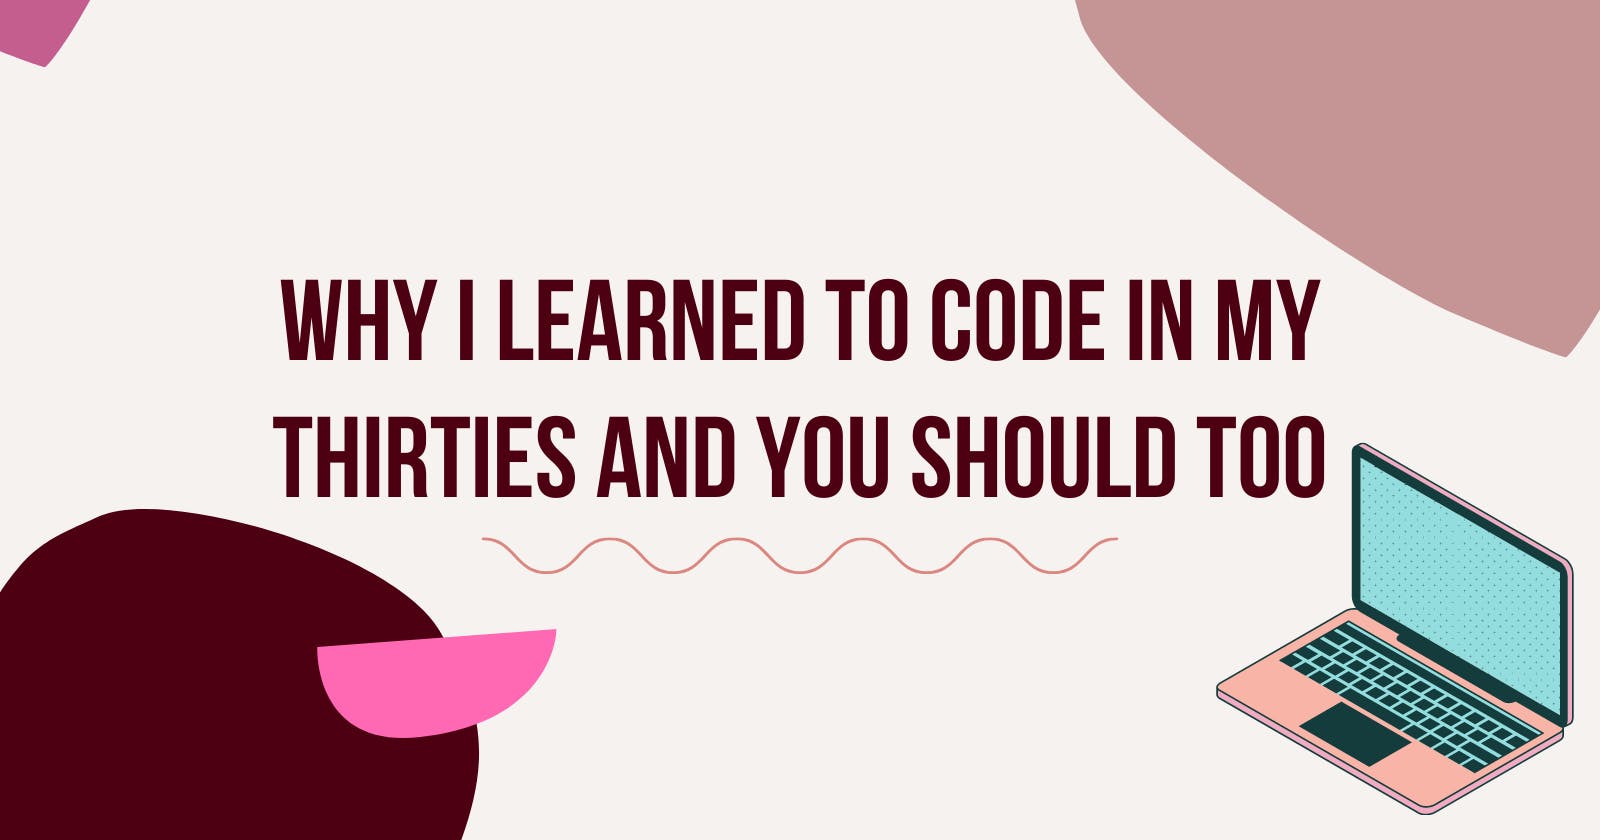 Why I Learned to Code in My Thirties and You Should Too